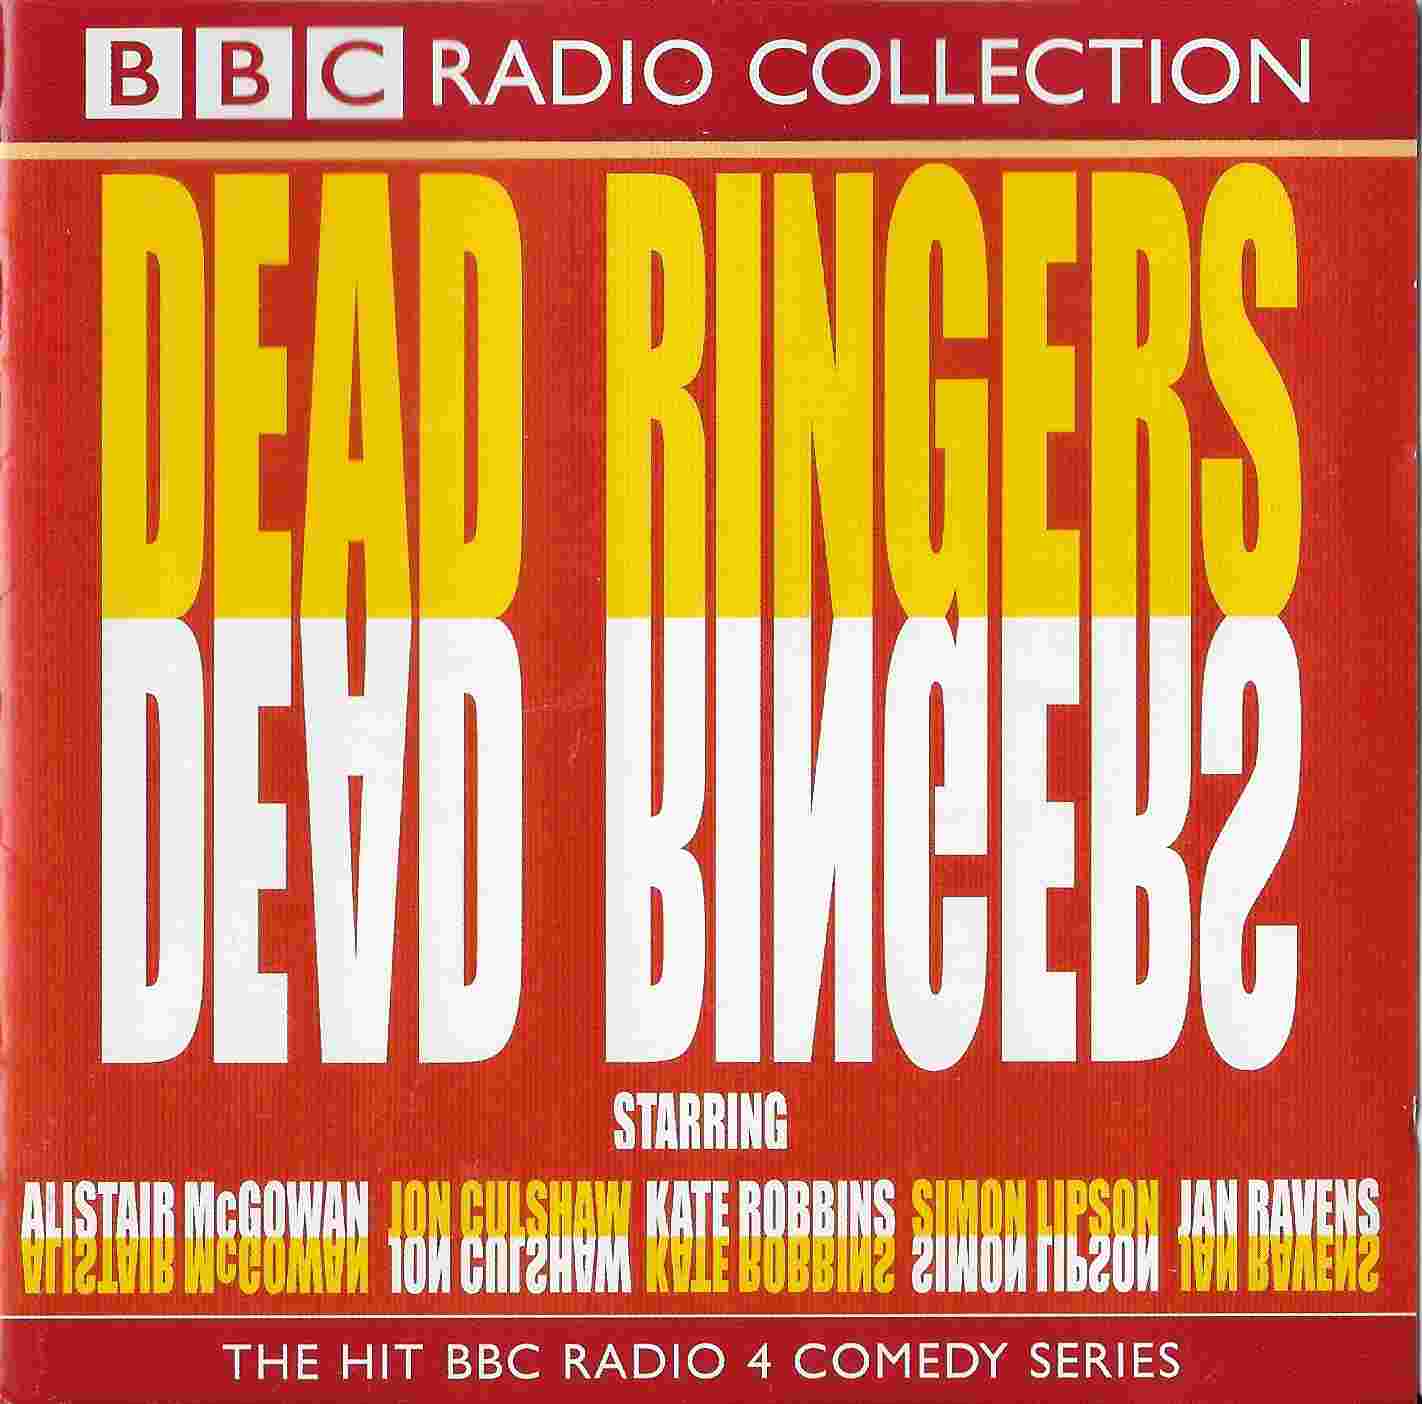 Picture of ISBN 0-563-47753-9 Dead ringers by artist Various from the BBC cds - Records and Tapes library